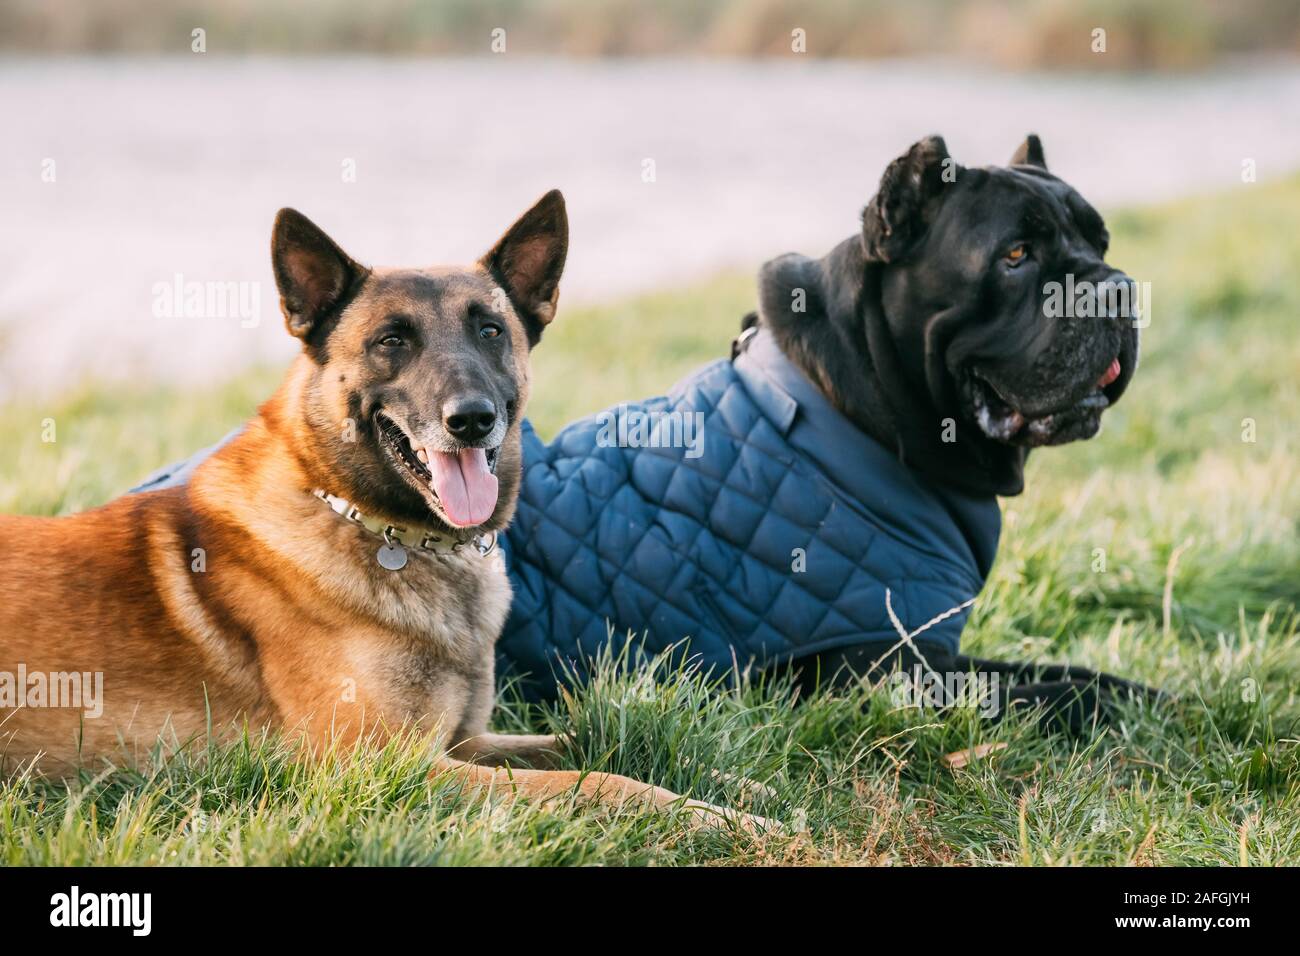 Red Malinois Dog And Black Cane Corso Dog Sitting Together In Grass. Cane Corso Dog Wears In Warm Clothes. Big Dog Breeds. Stock Photo